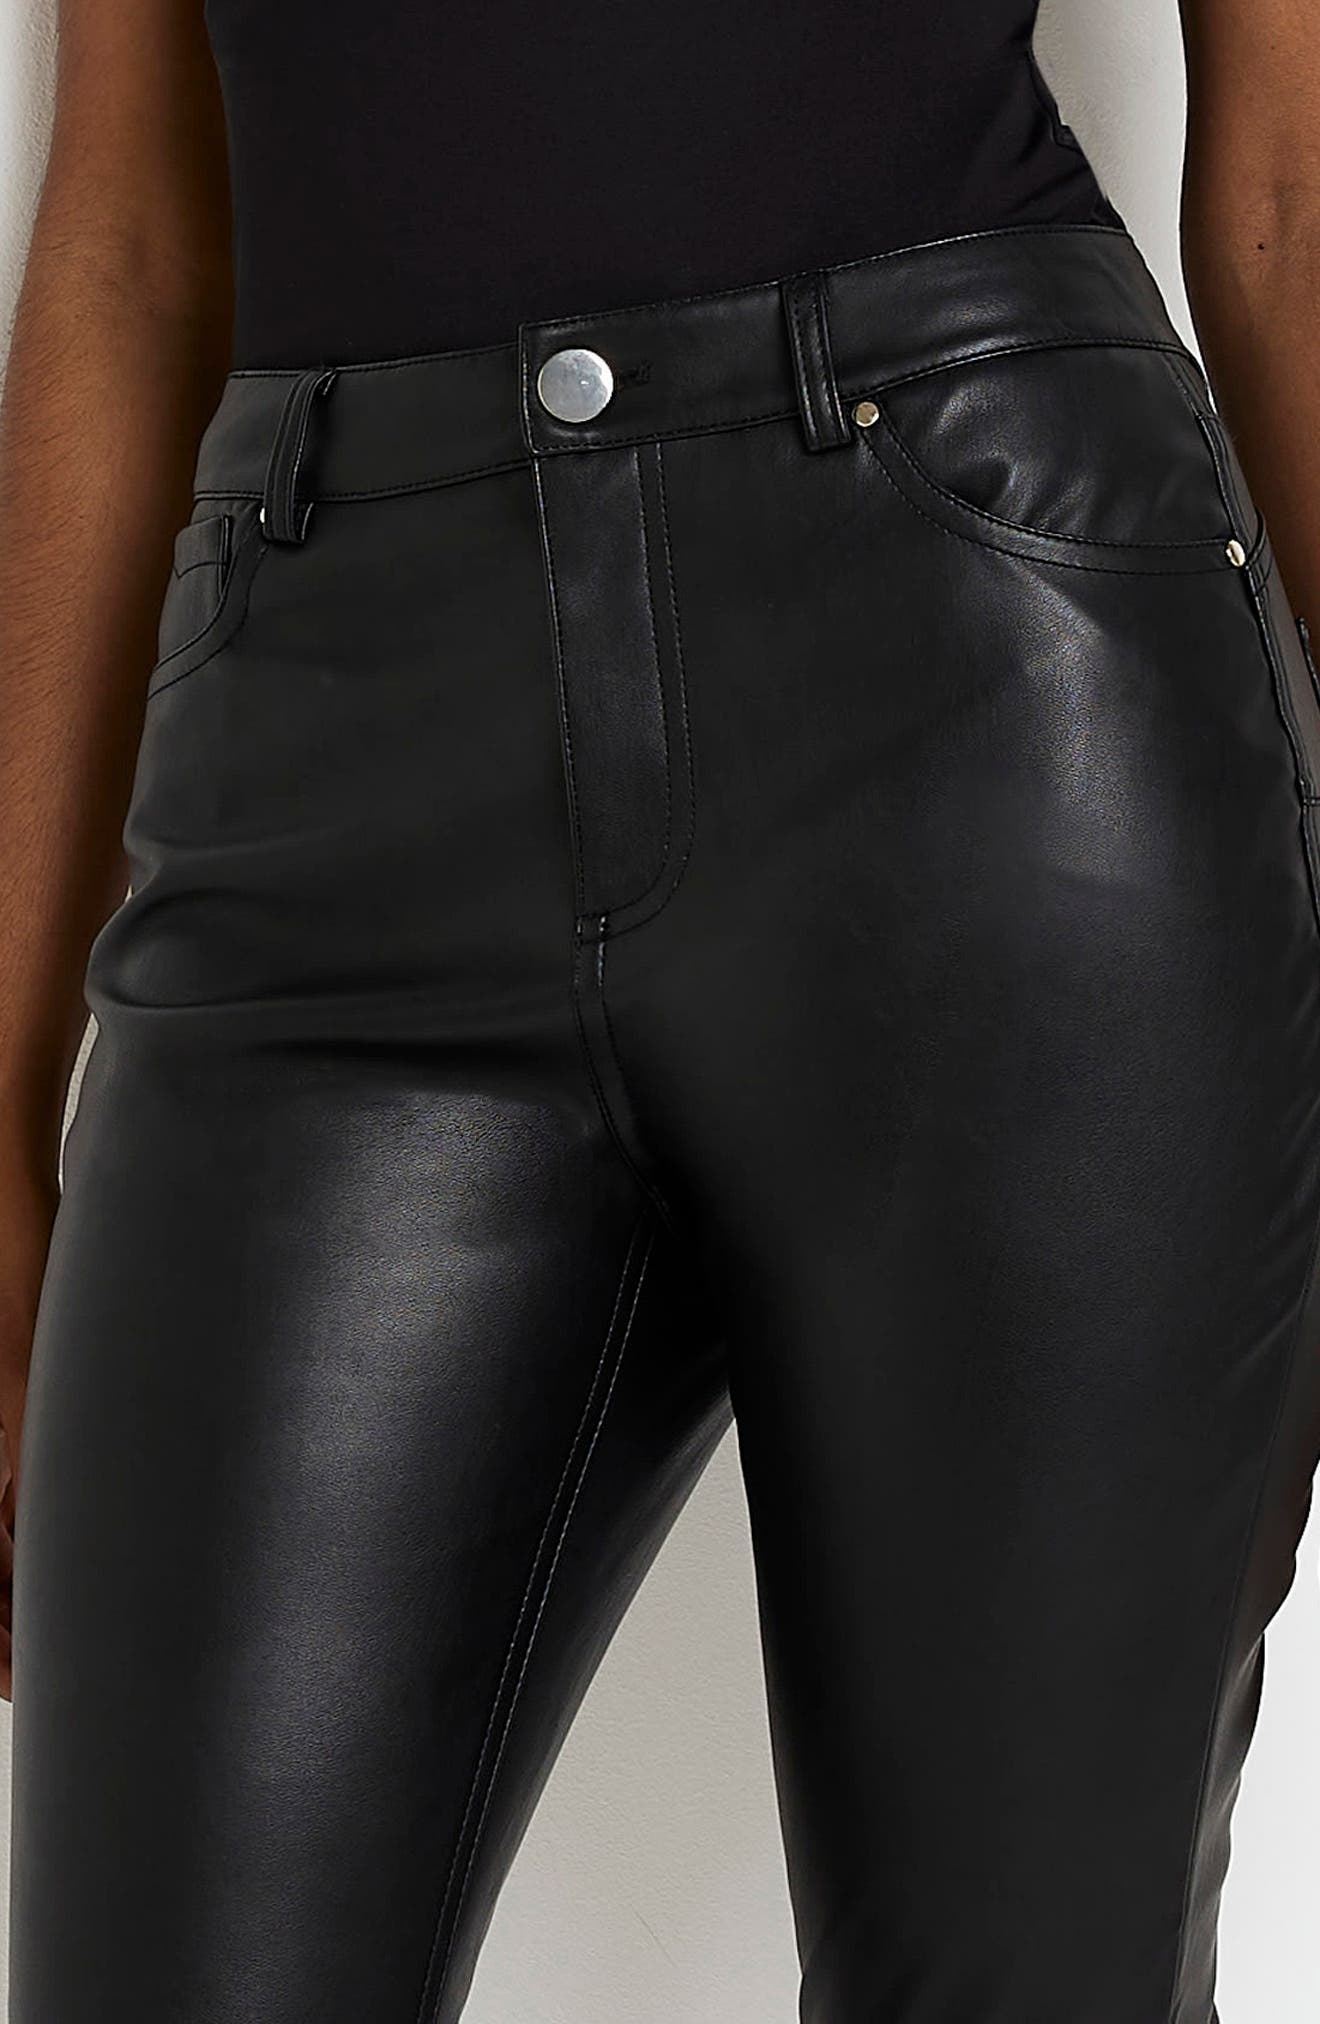 Girls Faux Leather Skinny pants River Island Girls Clothing Pants Leather Pants 